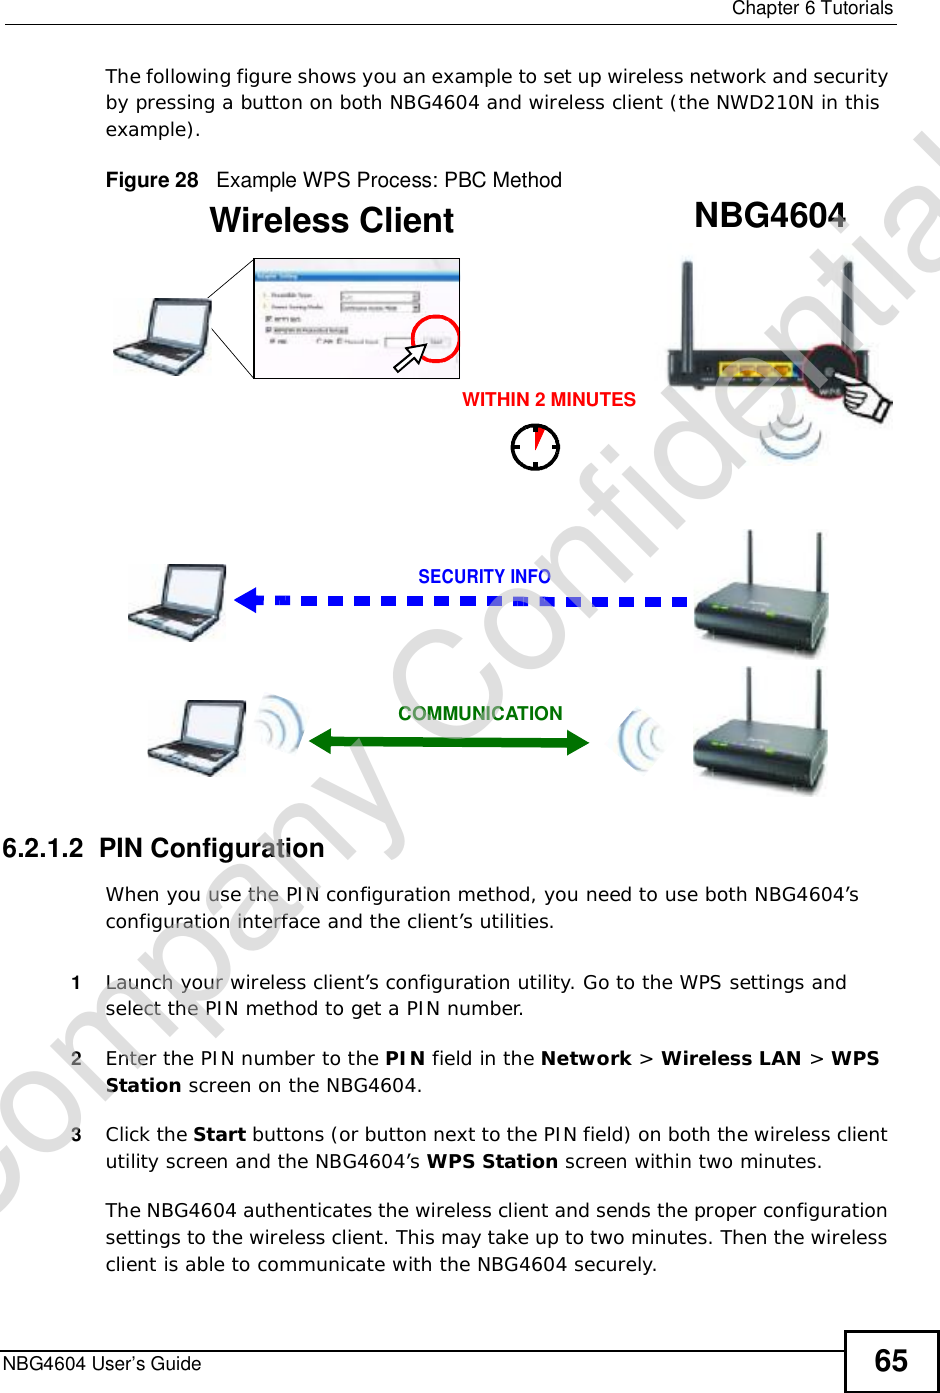  Chapter 6TutorialsNBG4604 User’s Guide 65The following figure shows you an example to set up wireless network and security by pressing a button on both NBG4604 and wireless client (the NWD210N in this example).Figure 28   Example WPS Process: PBC Method6.2.1.2  PIN ConfigurationWhen you use the PIN configuration method, you need to use both NBG4604’s configuration interface and the client’s utilities.1Launch your wireless client’s configuration utility. Go to the WPS settings and select the PIN method to get a PIN number.2Enter the PIN number to the PIN field in the Network &gt; Wireless LAN &gt;WPSStation screen on the NBG4604.3Click the Start buttons (or button next to the PIN field) on both the wireless client utility screen and the NBG4604’s WPS Station screen within two minutes.The NBG4604 authenticates the wireless client and sends the proper configuration settings to the wireless client. This may take up to two minutes. Then the wireless client is able to communicate with the NBG4604 securely. Wireless Client    NBG4604SECURITY INFOCOMMUNICATIONWITHIN 2 MINUTESCompany Confidential